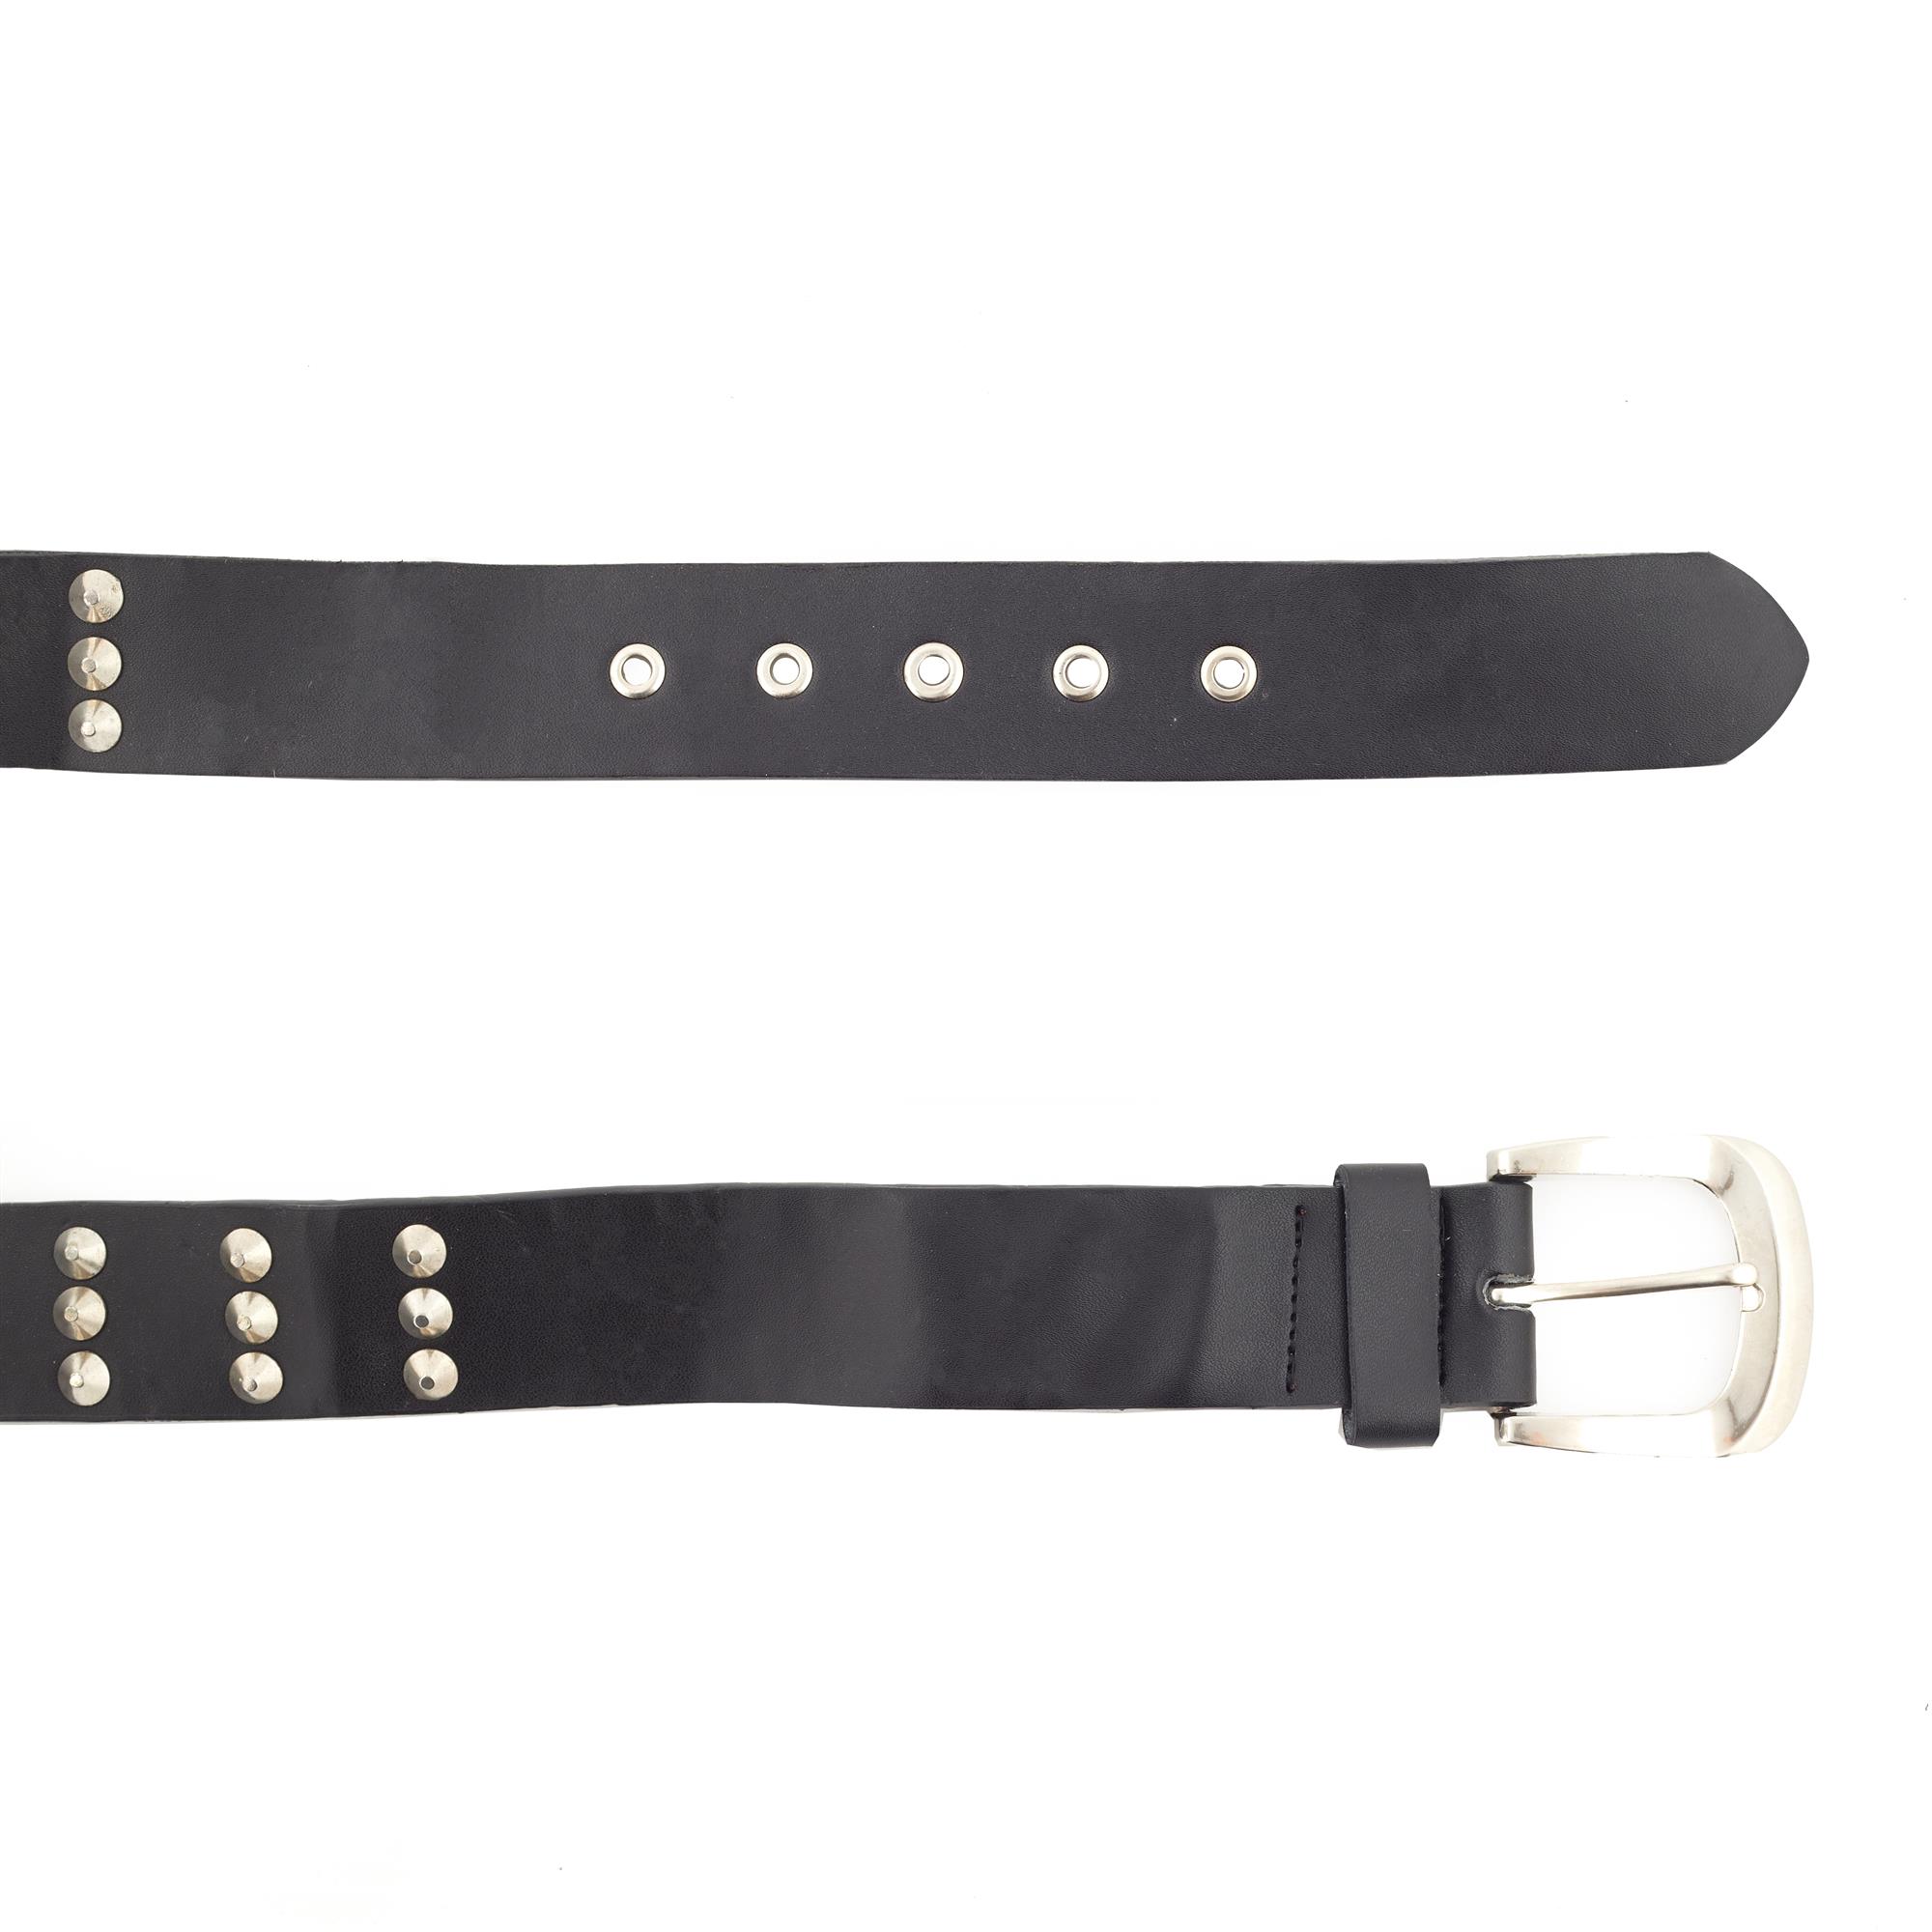 LEATHER BELT Small Pins 3 Rows Black - 14